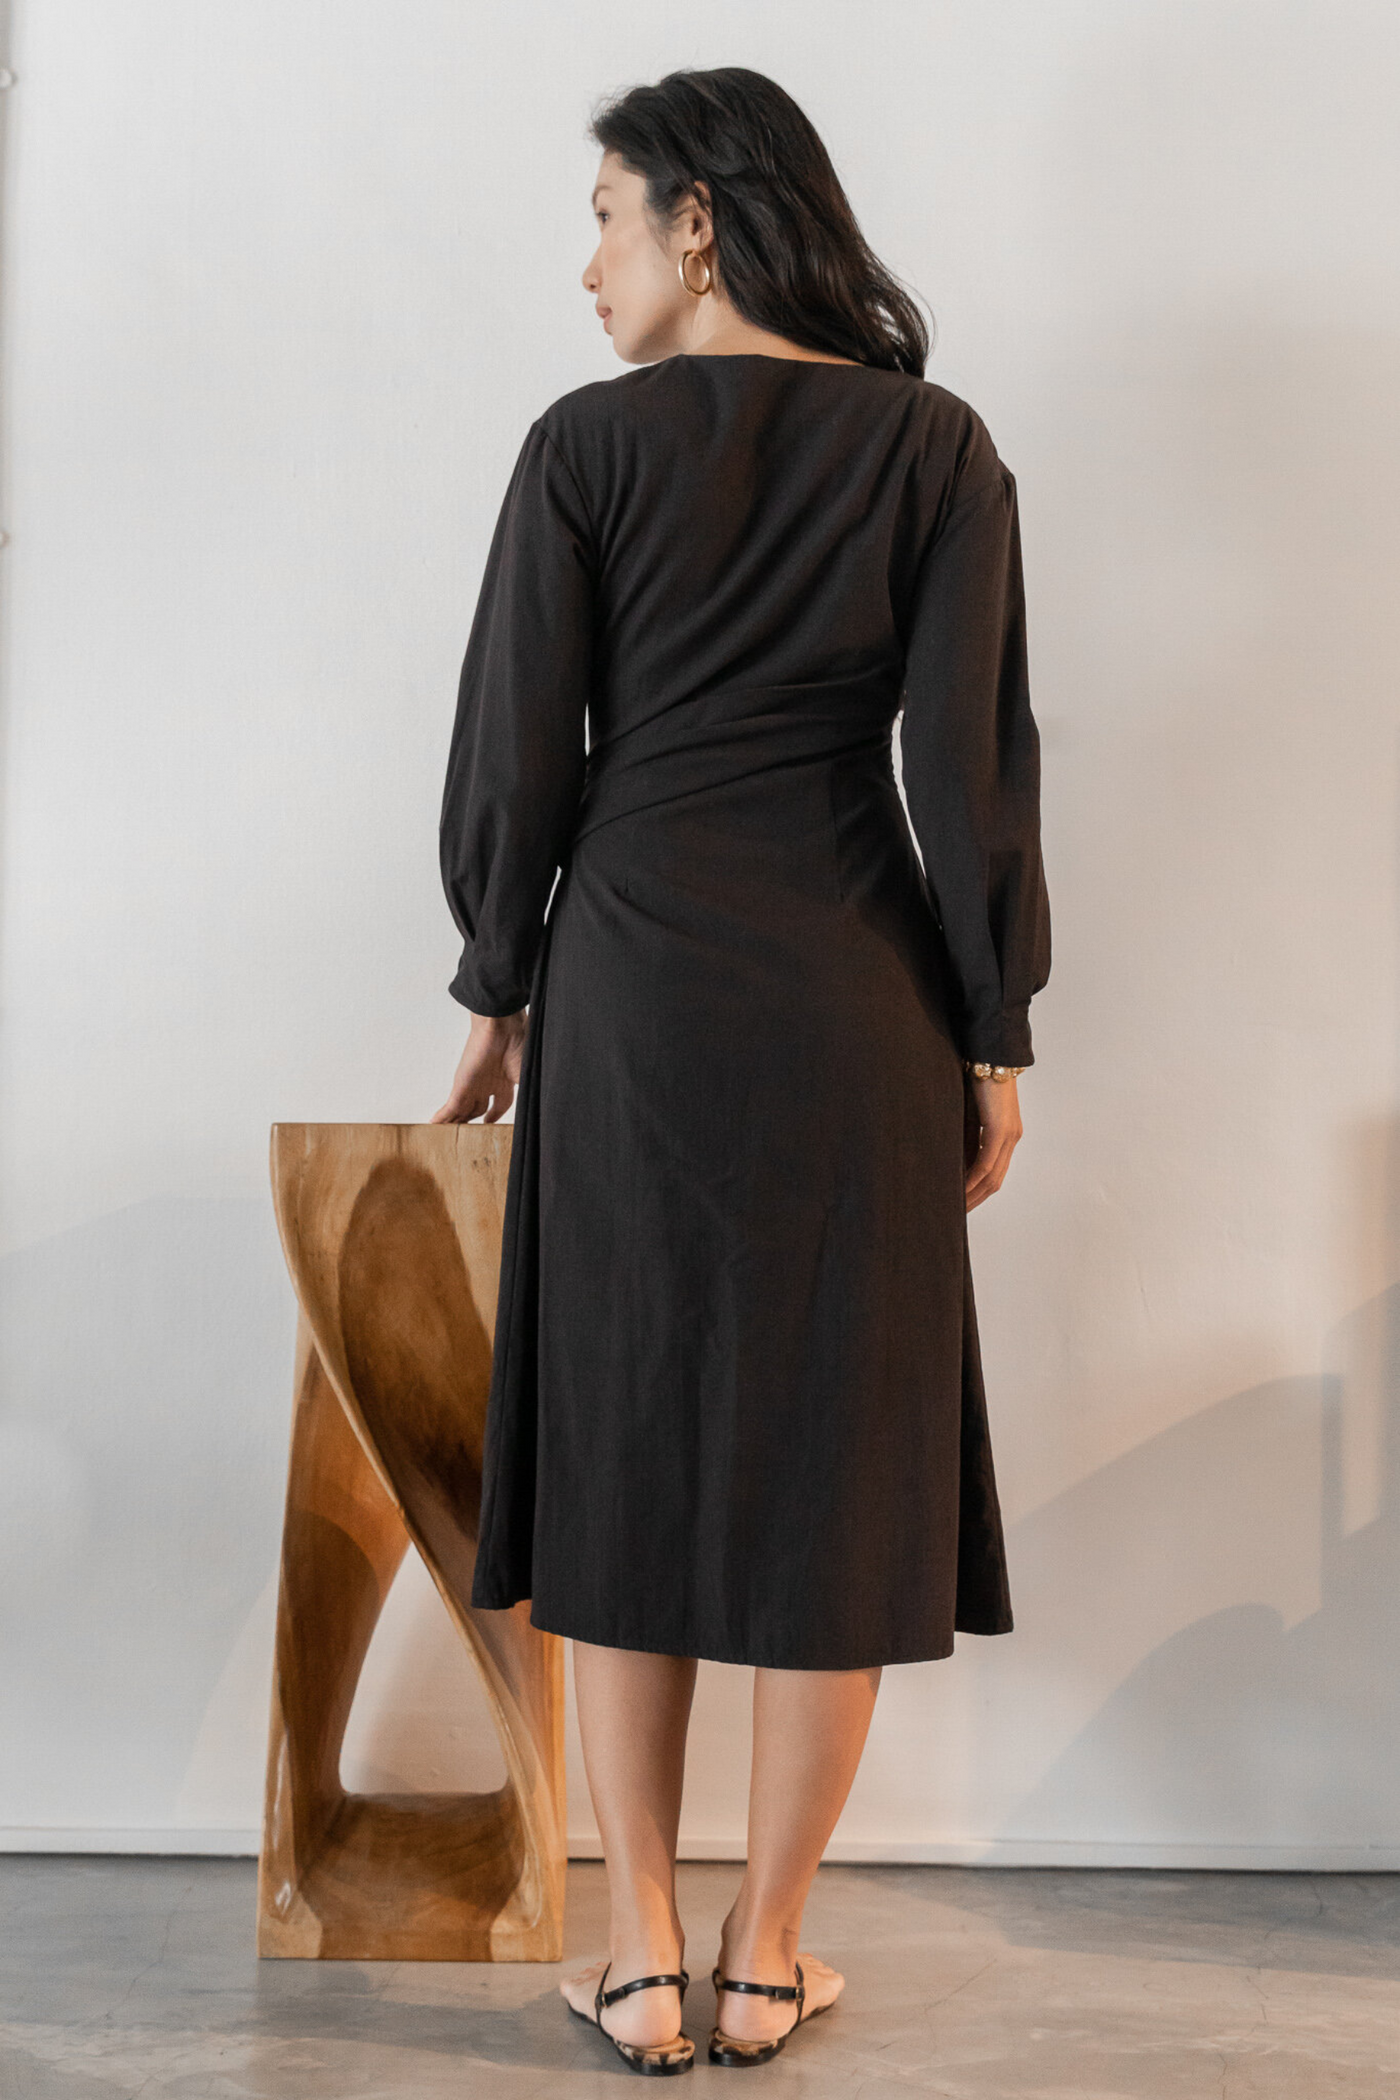 Su By Hand Vanda Dress in Black, available on ZERRIN with free Singapore shipping